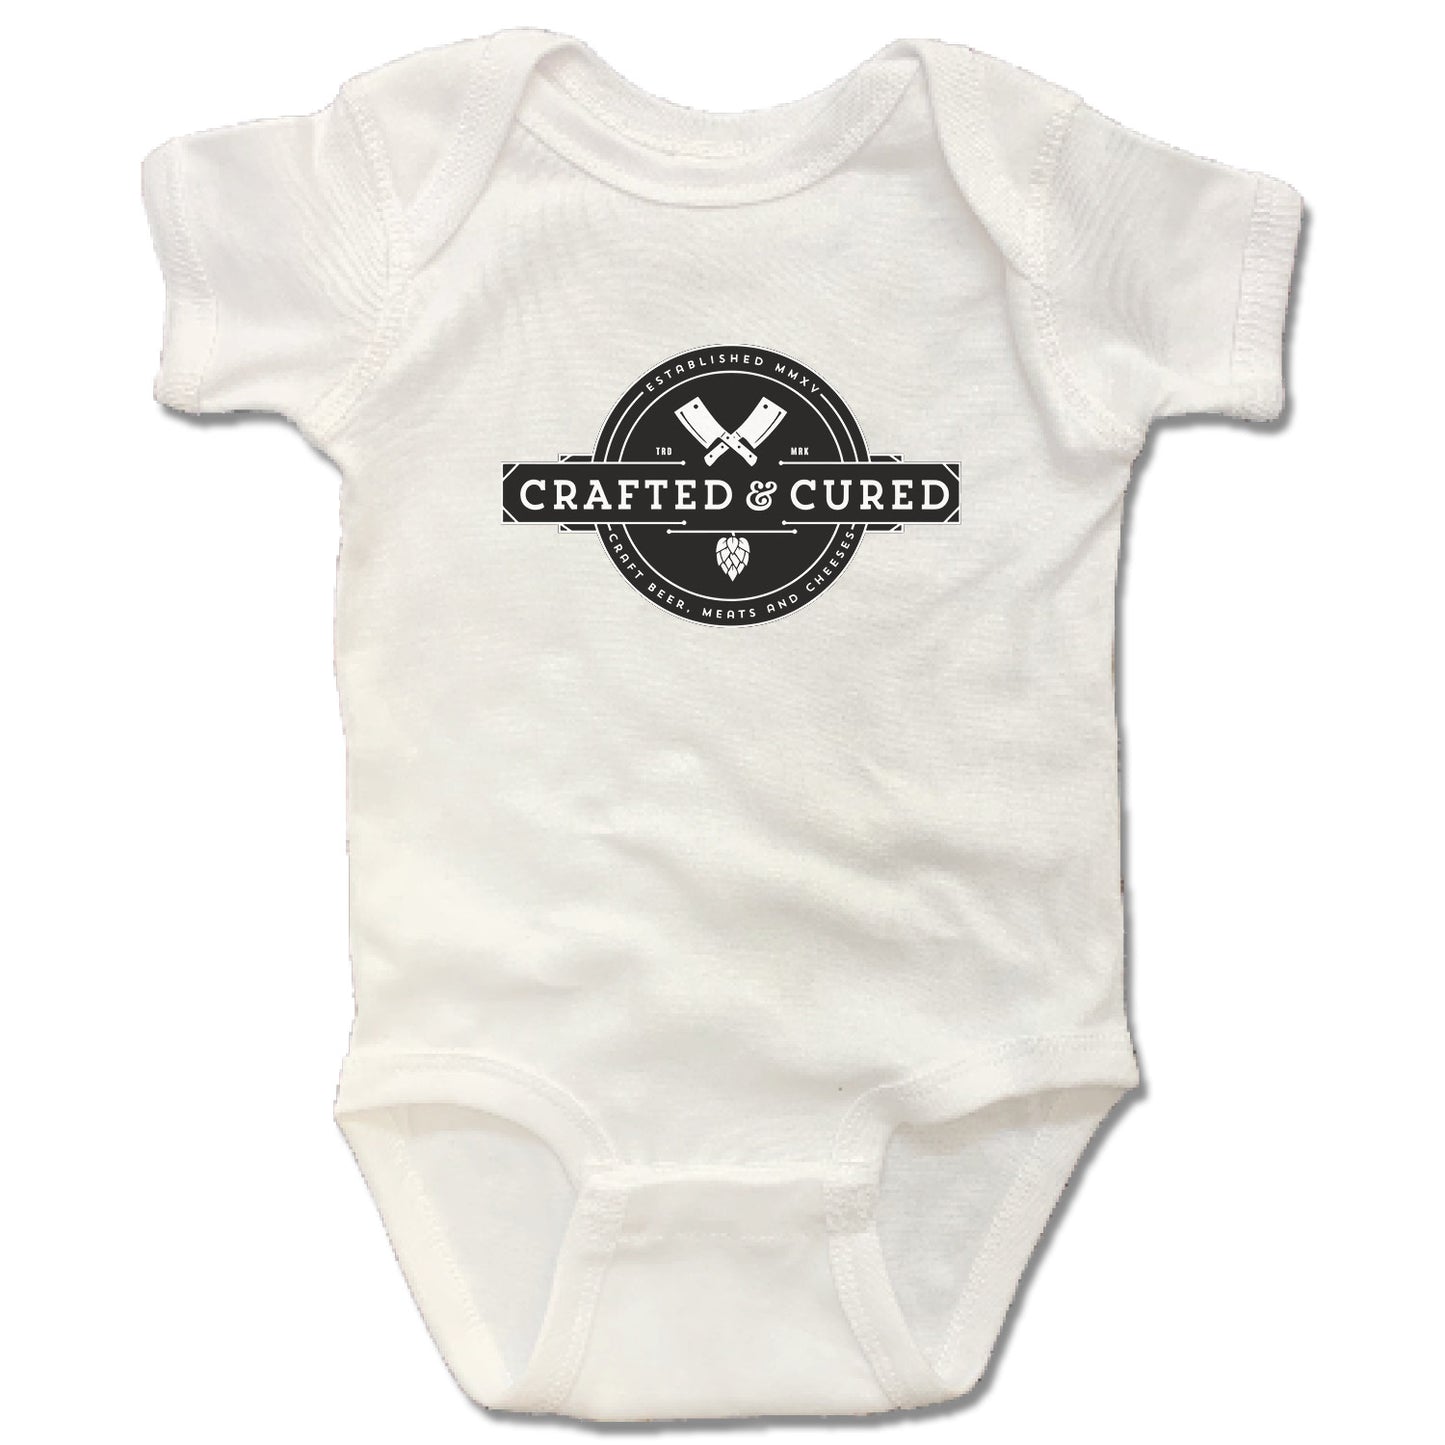 CRAFTED & CURED | WHITE ONESIE | BUTCHER AND HOPS LOGO